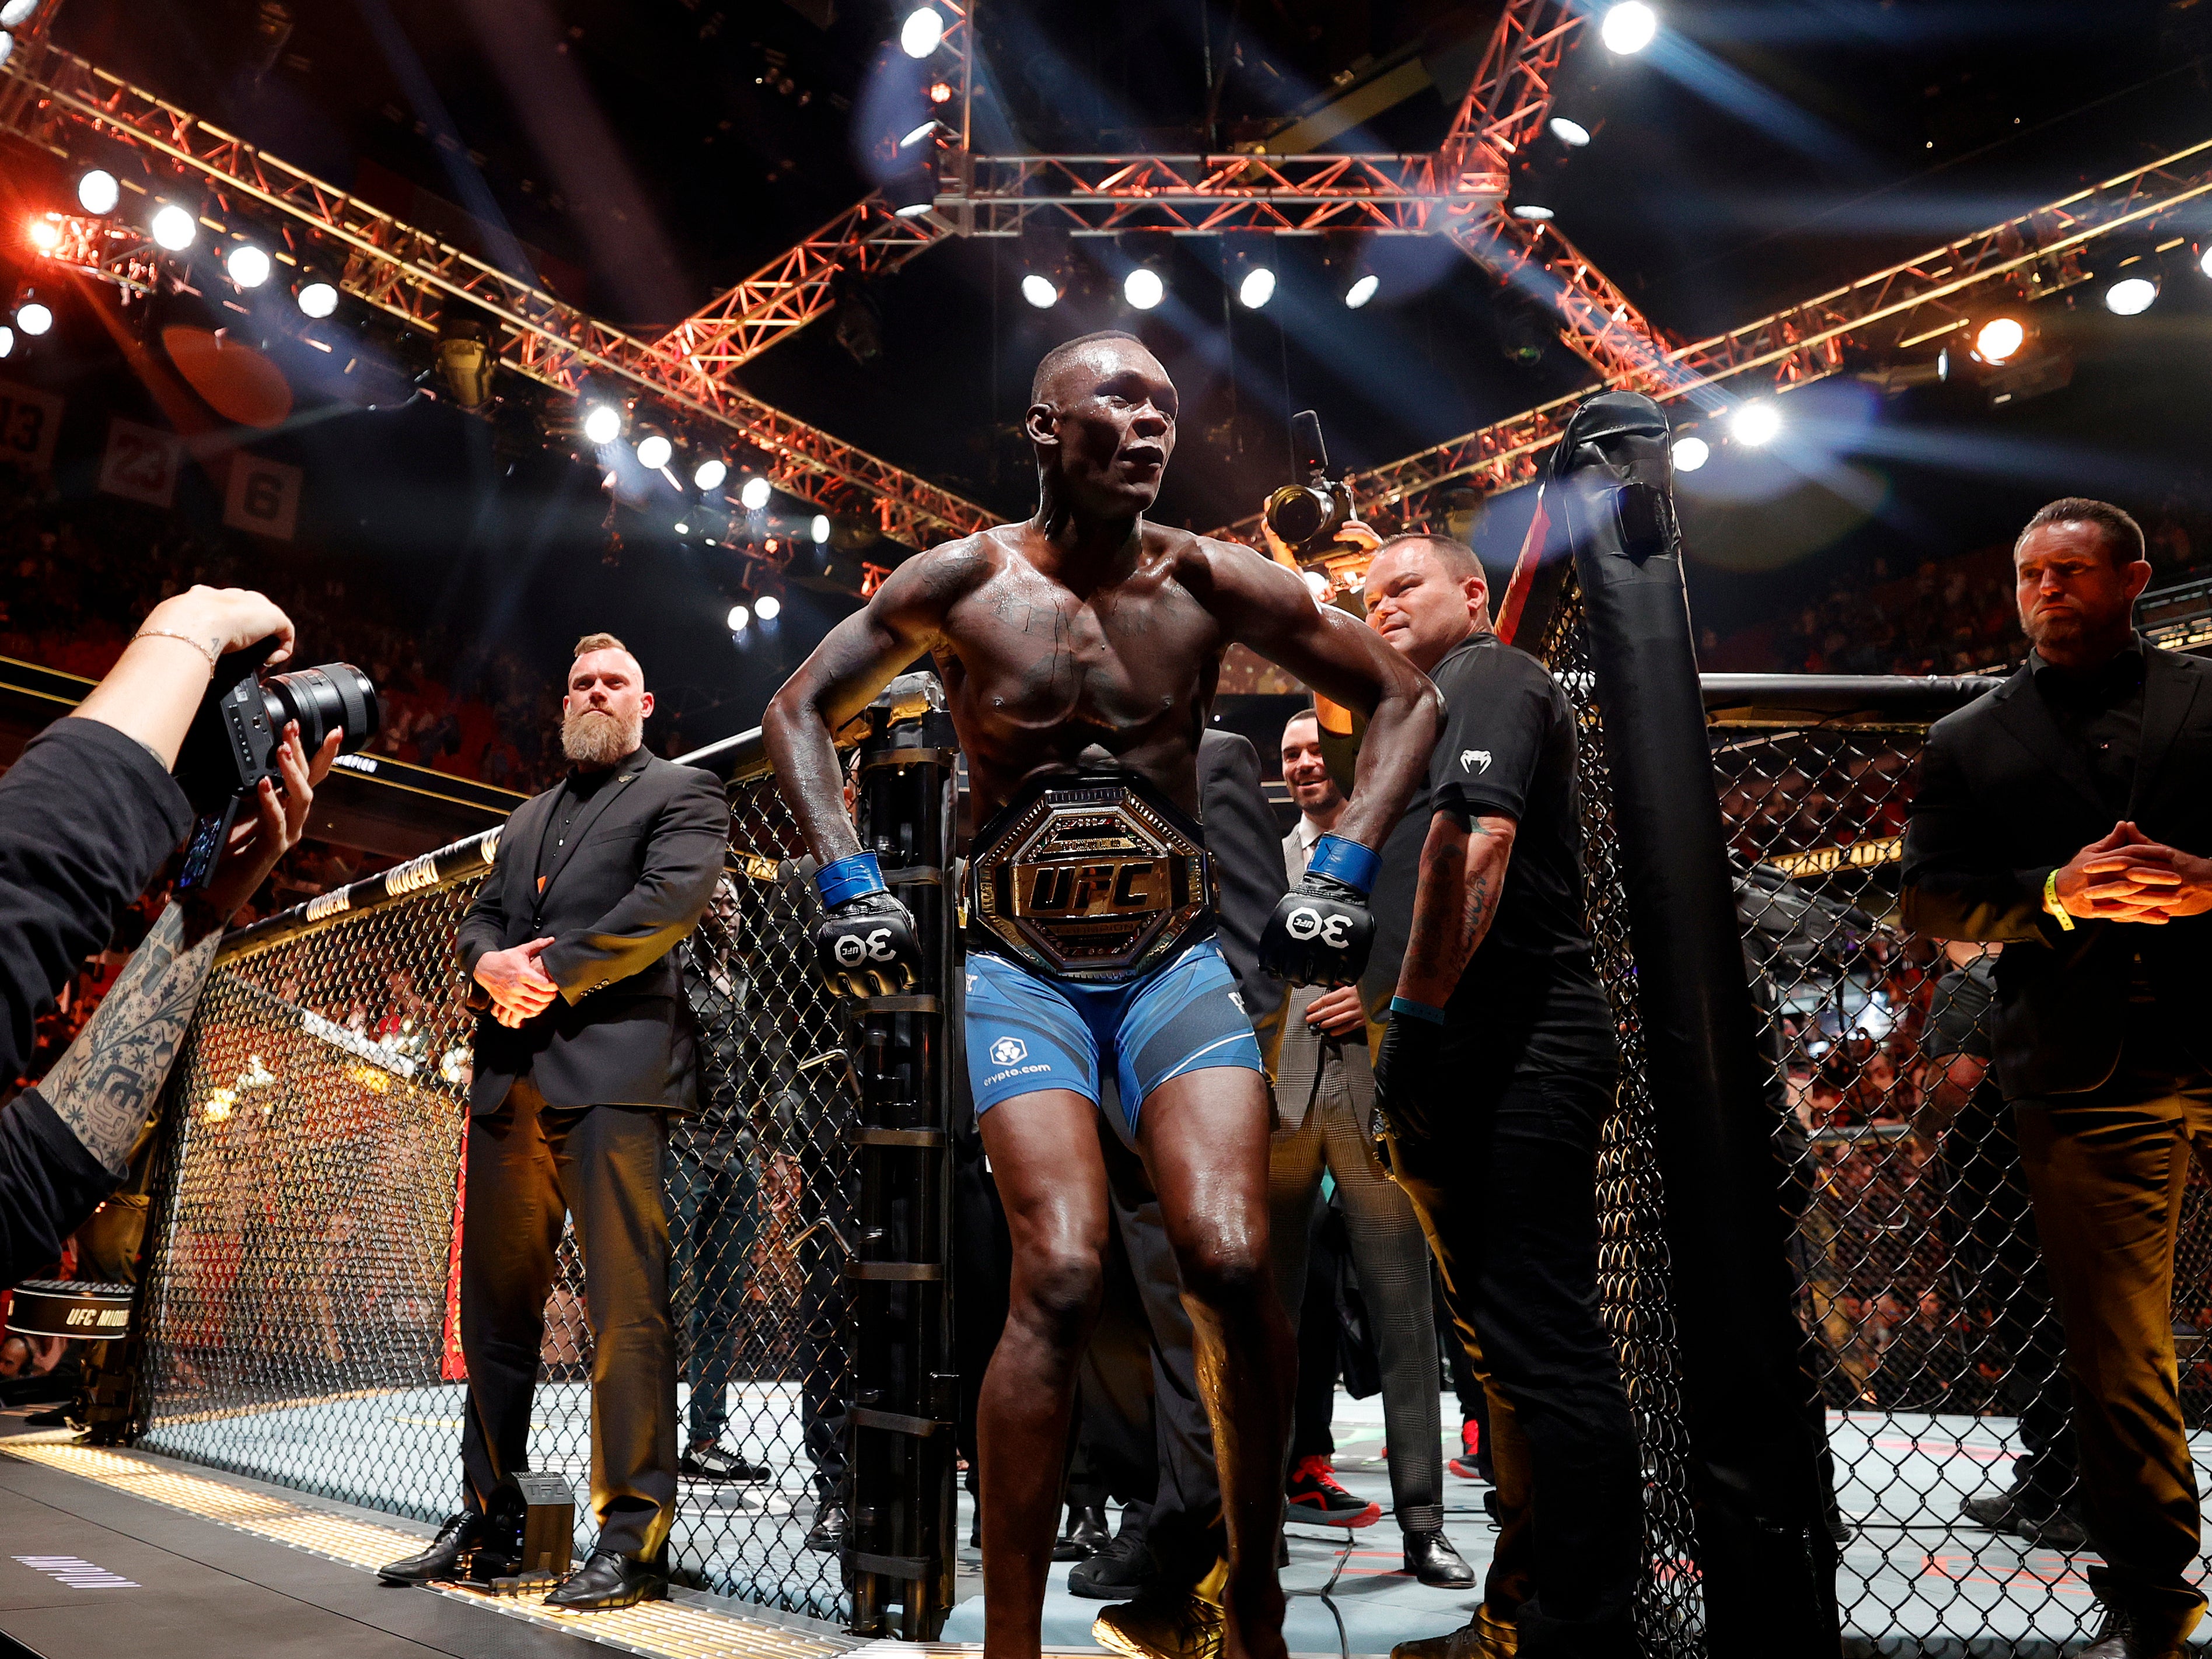 Israel Adesanya gains revenge over Alex Pereira with stunning knockout